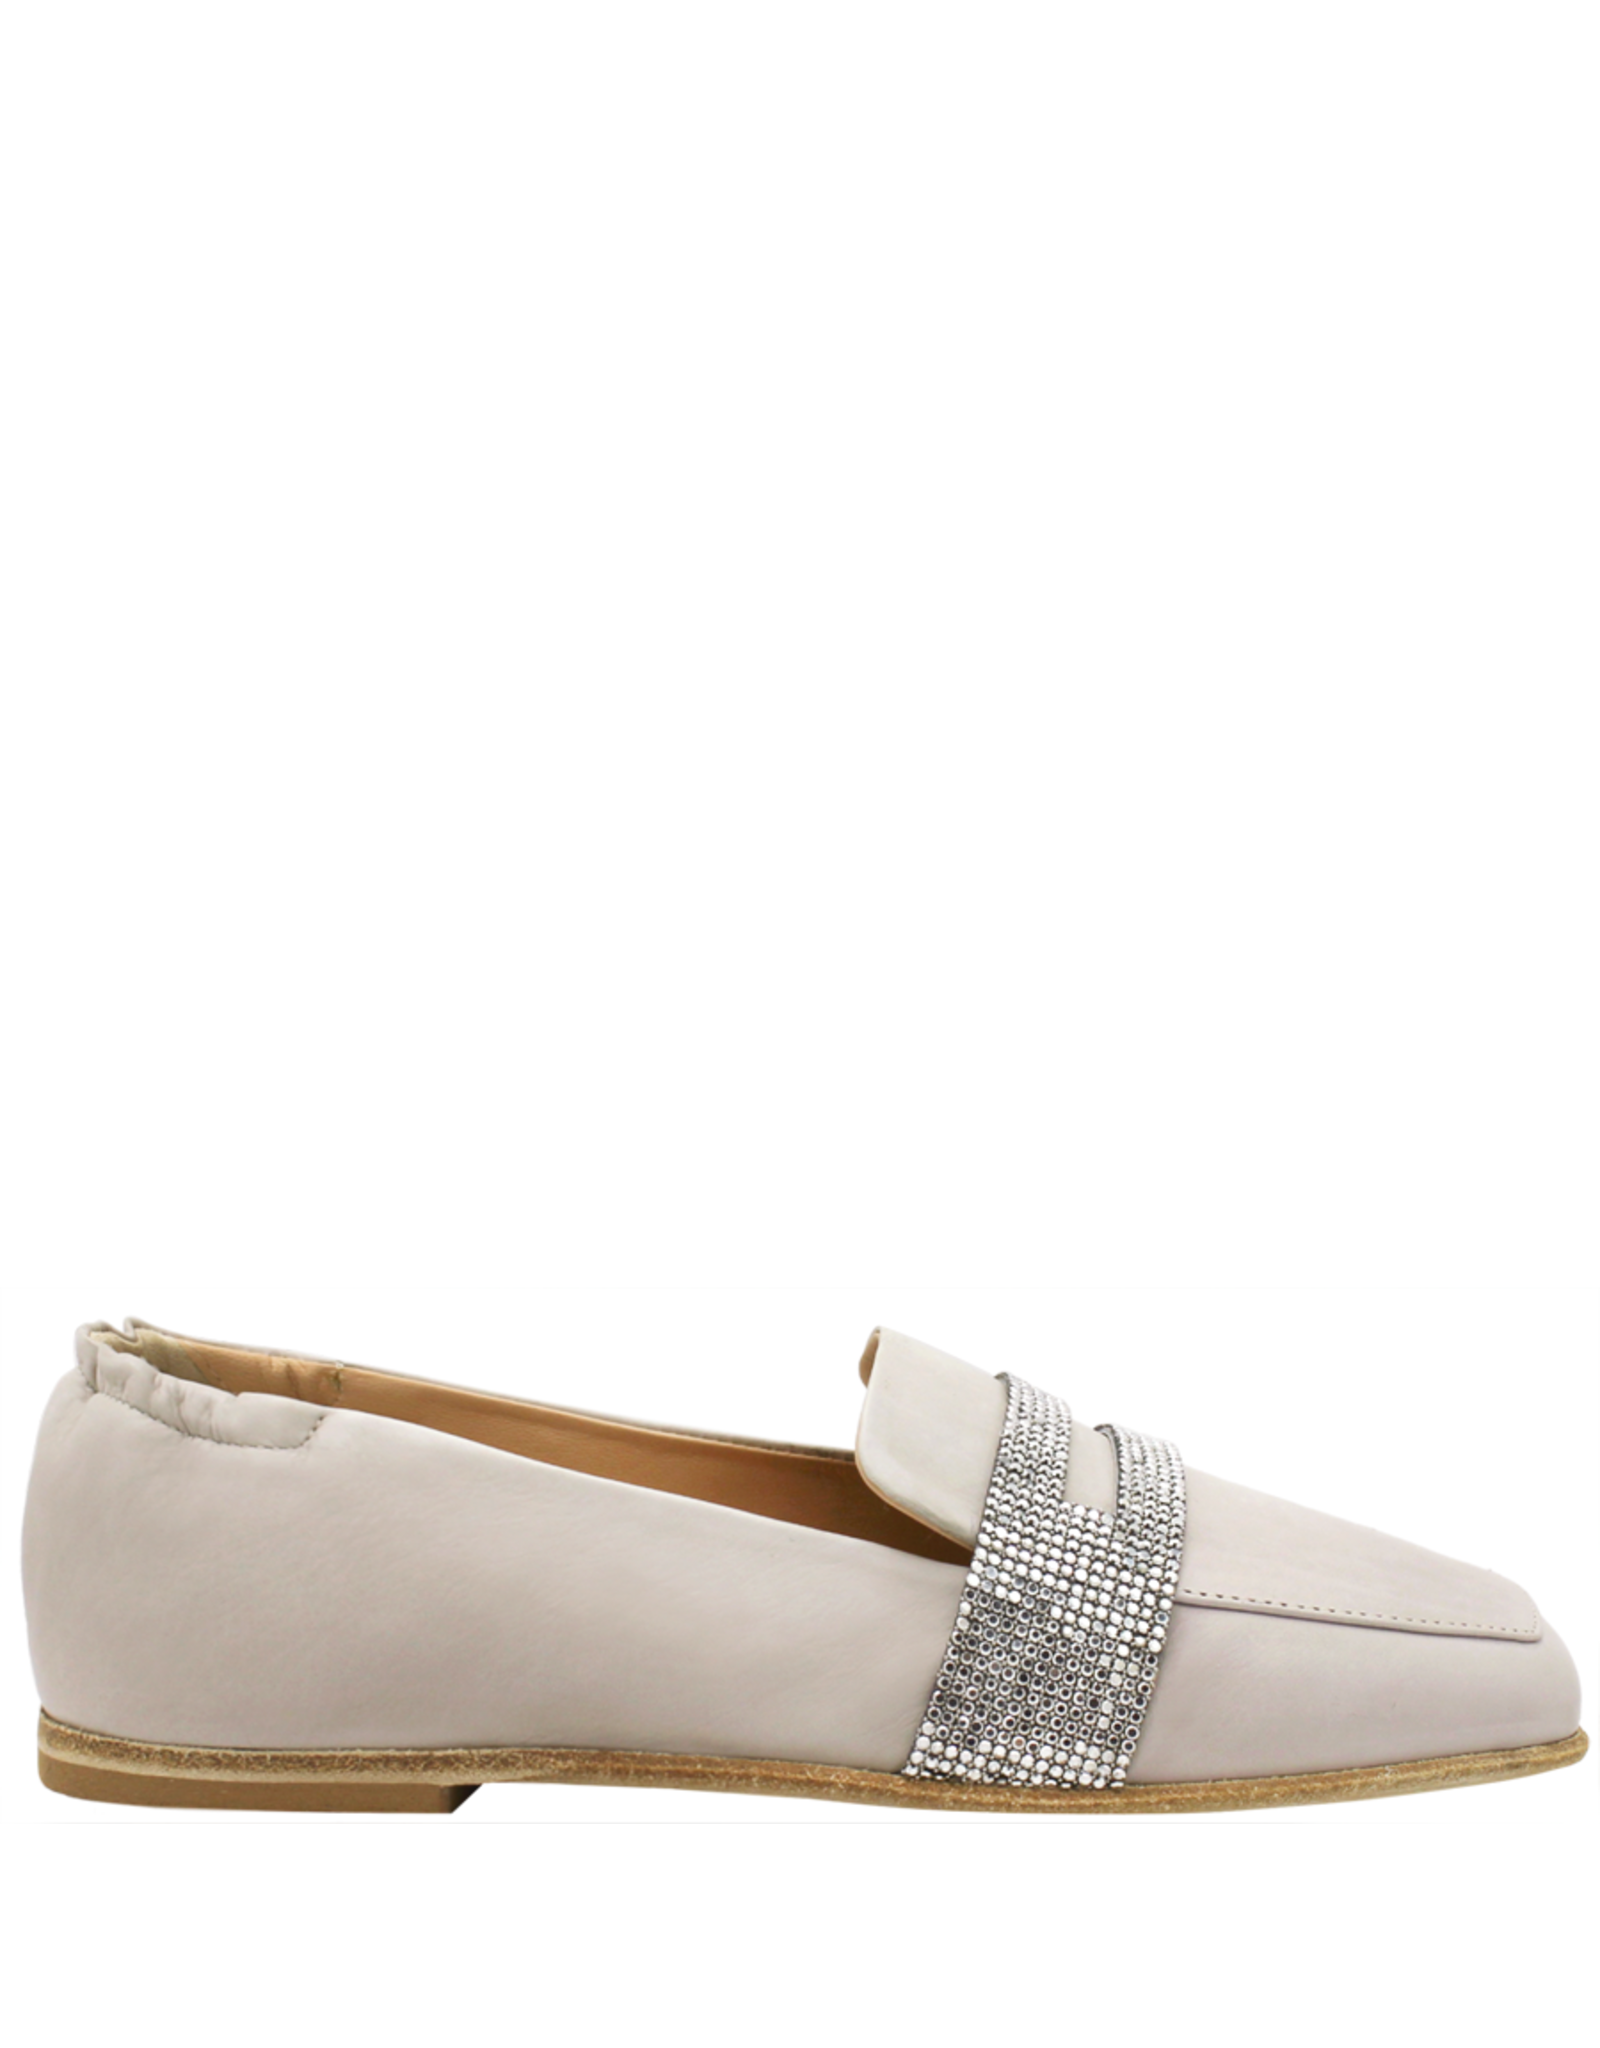 Now Now N43O Ice Loafer 8645